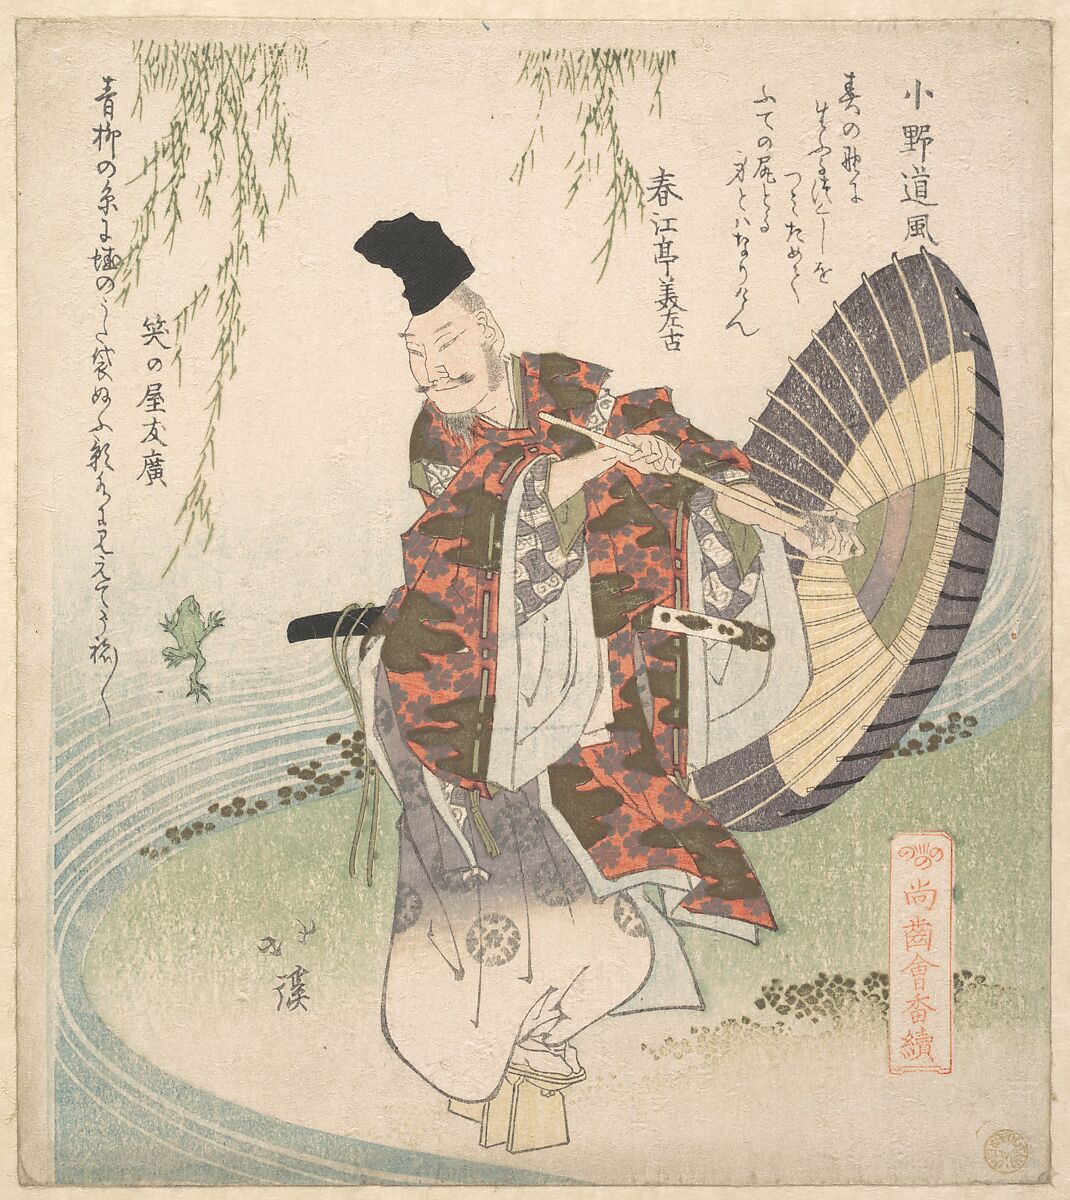 Ono no Tofu Standing on the Bank of a Stream and Watching a Frog Leap to Catch a Willow Branch, Totoya Hokkei (Japanese, 1780–1850), Woodblock print (surimono); ink and color on paper, Japan 